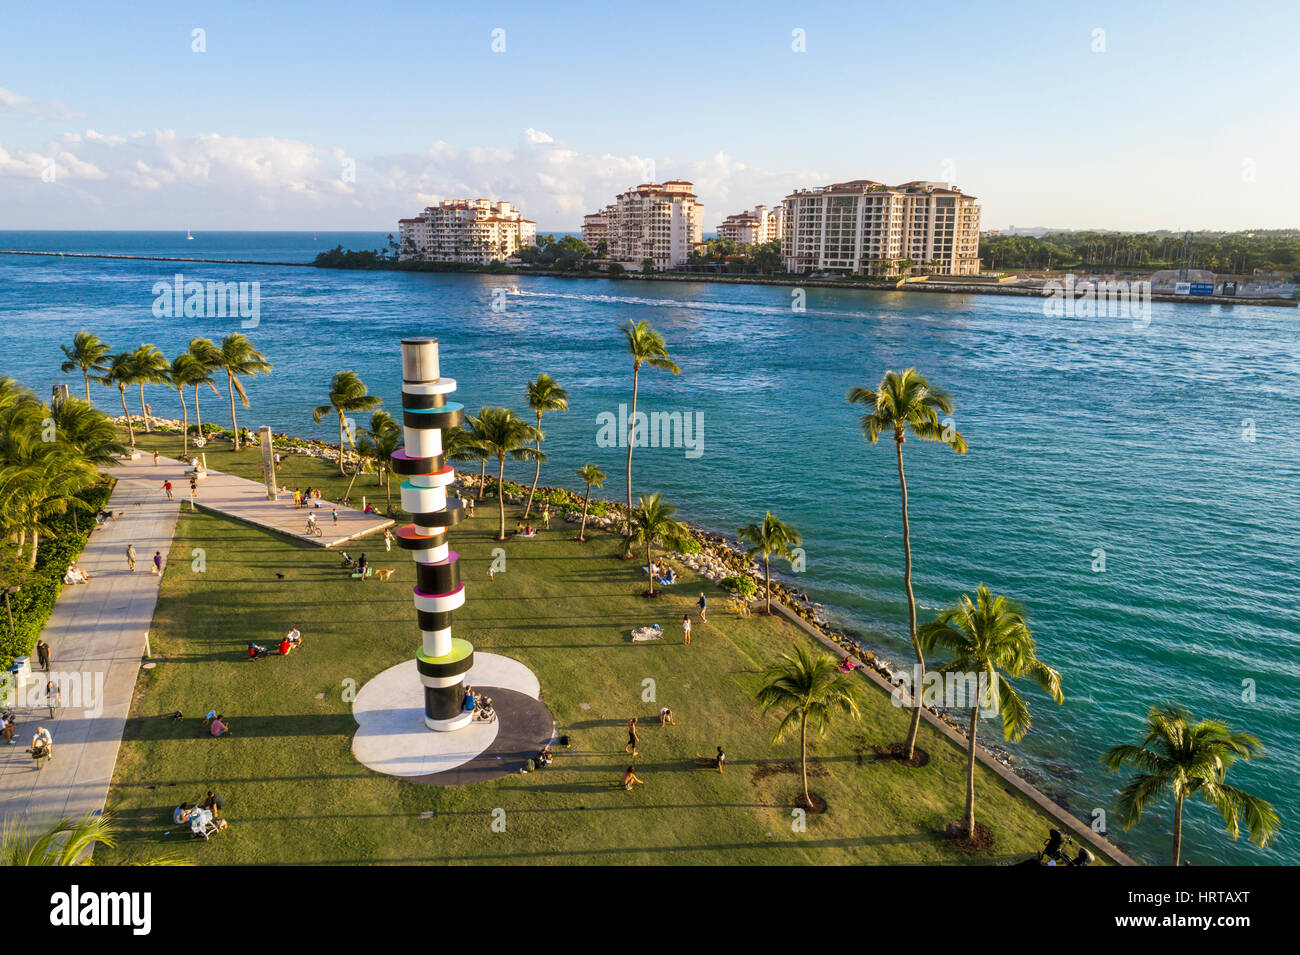 Miami Beach Florida,Atlantic Ocean,Government Cut,South Pointe Park,Fisher Island,Obstinate Lighthouse,Tobias Rehberger,public art,aerial overhead fro Stock Photo